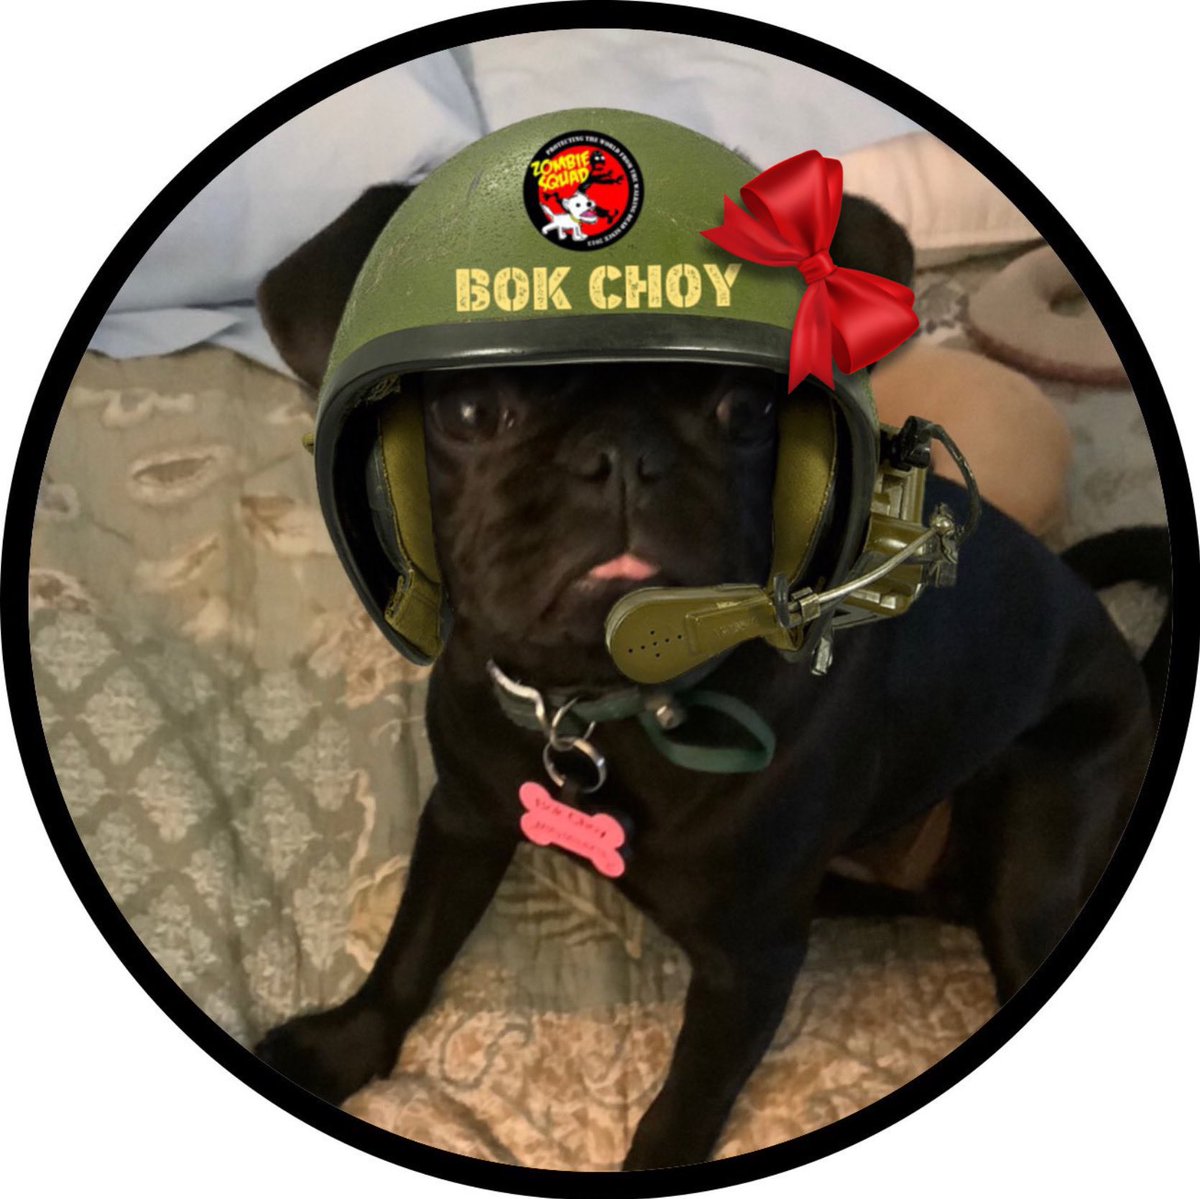 #ZZST me mom has to go to de work now and me can’t type. Great day of hunting with de squad, RAAAAaaa.  Corporal Bok Choy out!